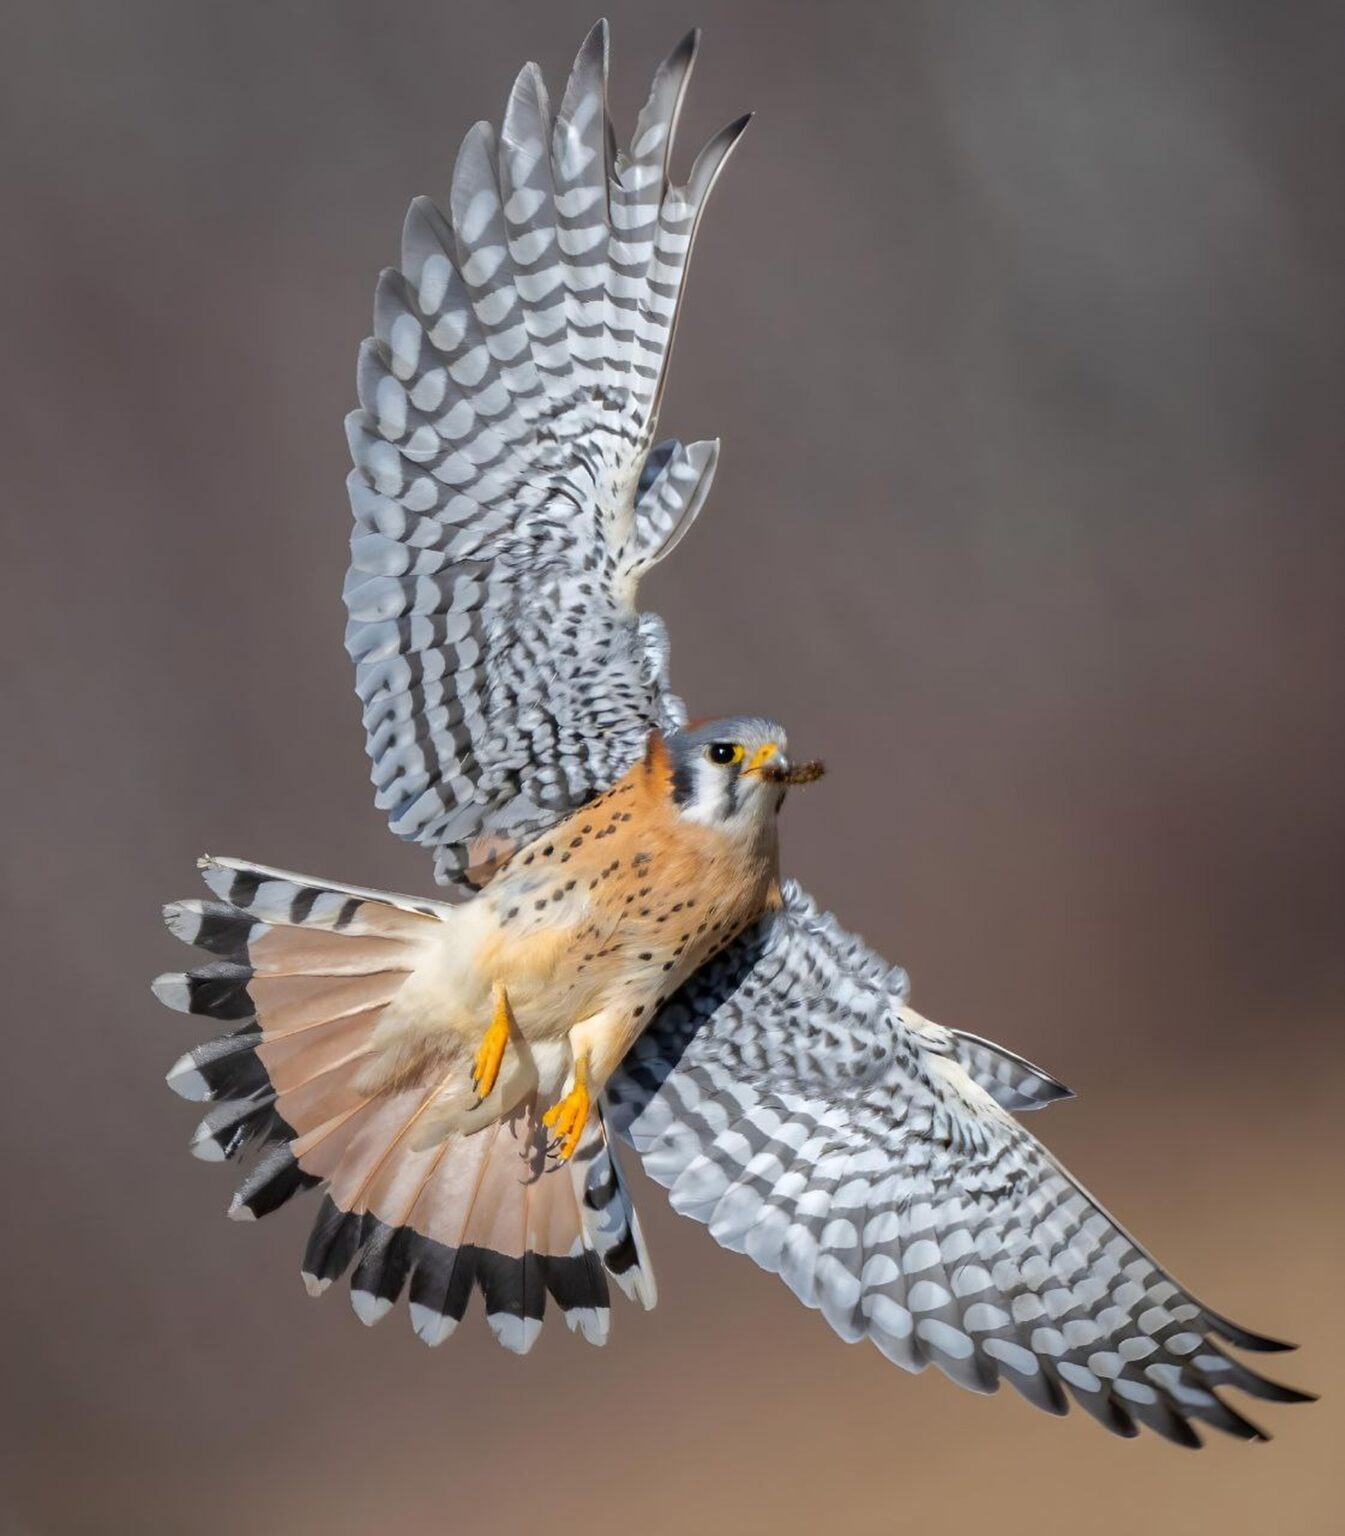 A bird with spotted wings and a reddish-brown body is captured mid-flight against a blurred background.